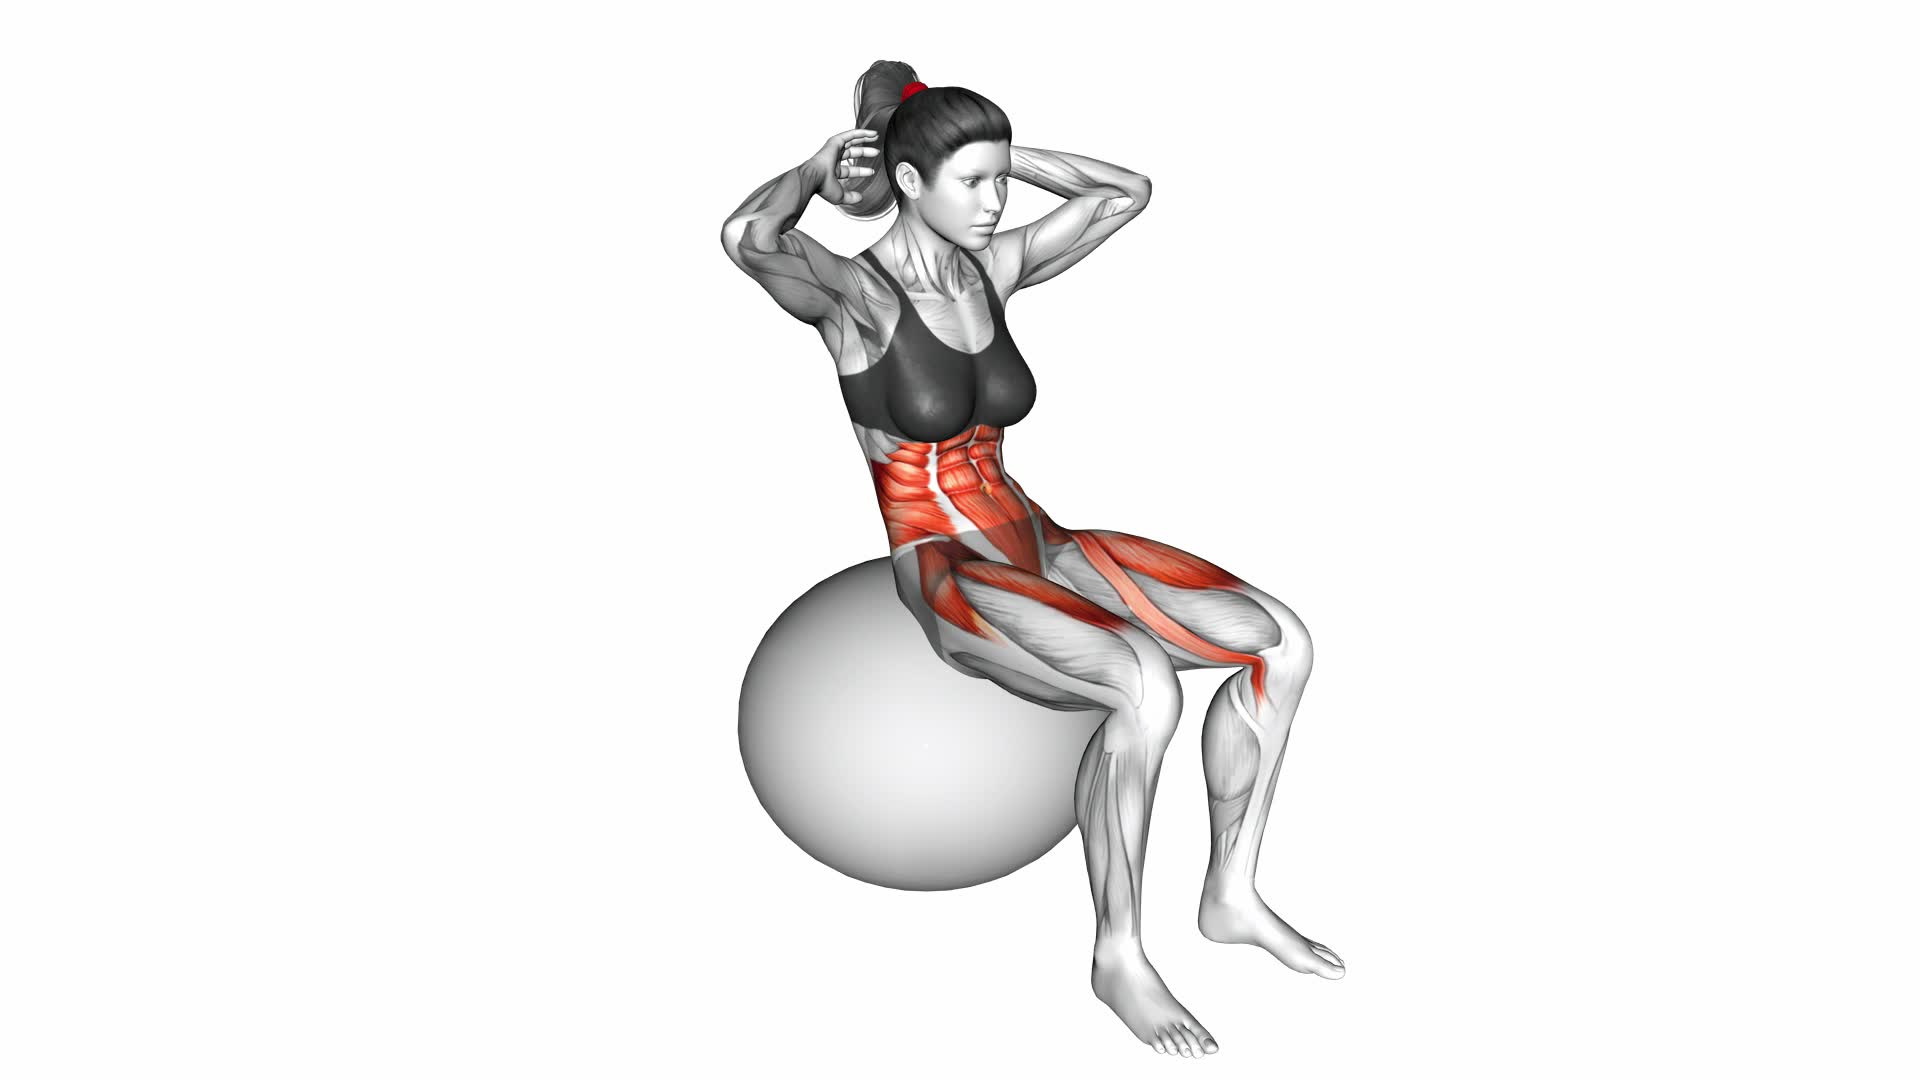 Ball Sit-up (on stability ball) - Video Exercise Guide & Tips